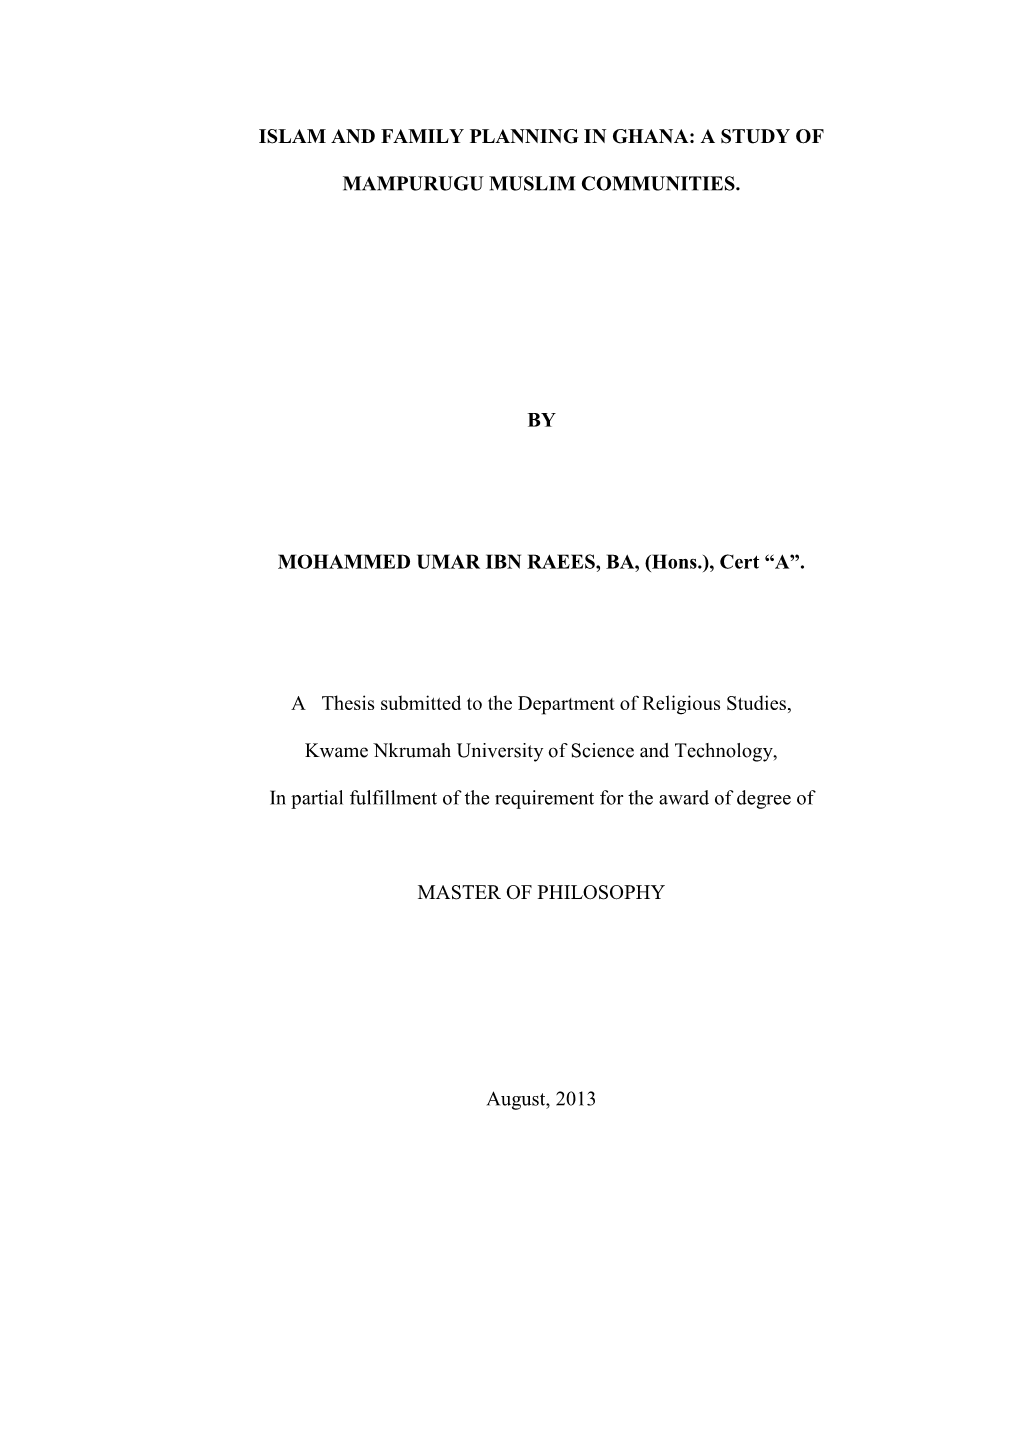 Islam and Family Planning in Ghana: a Study Of